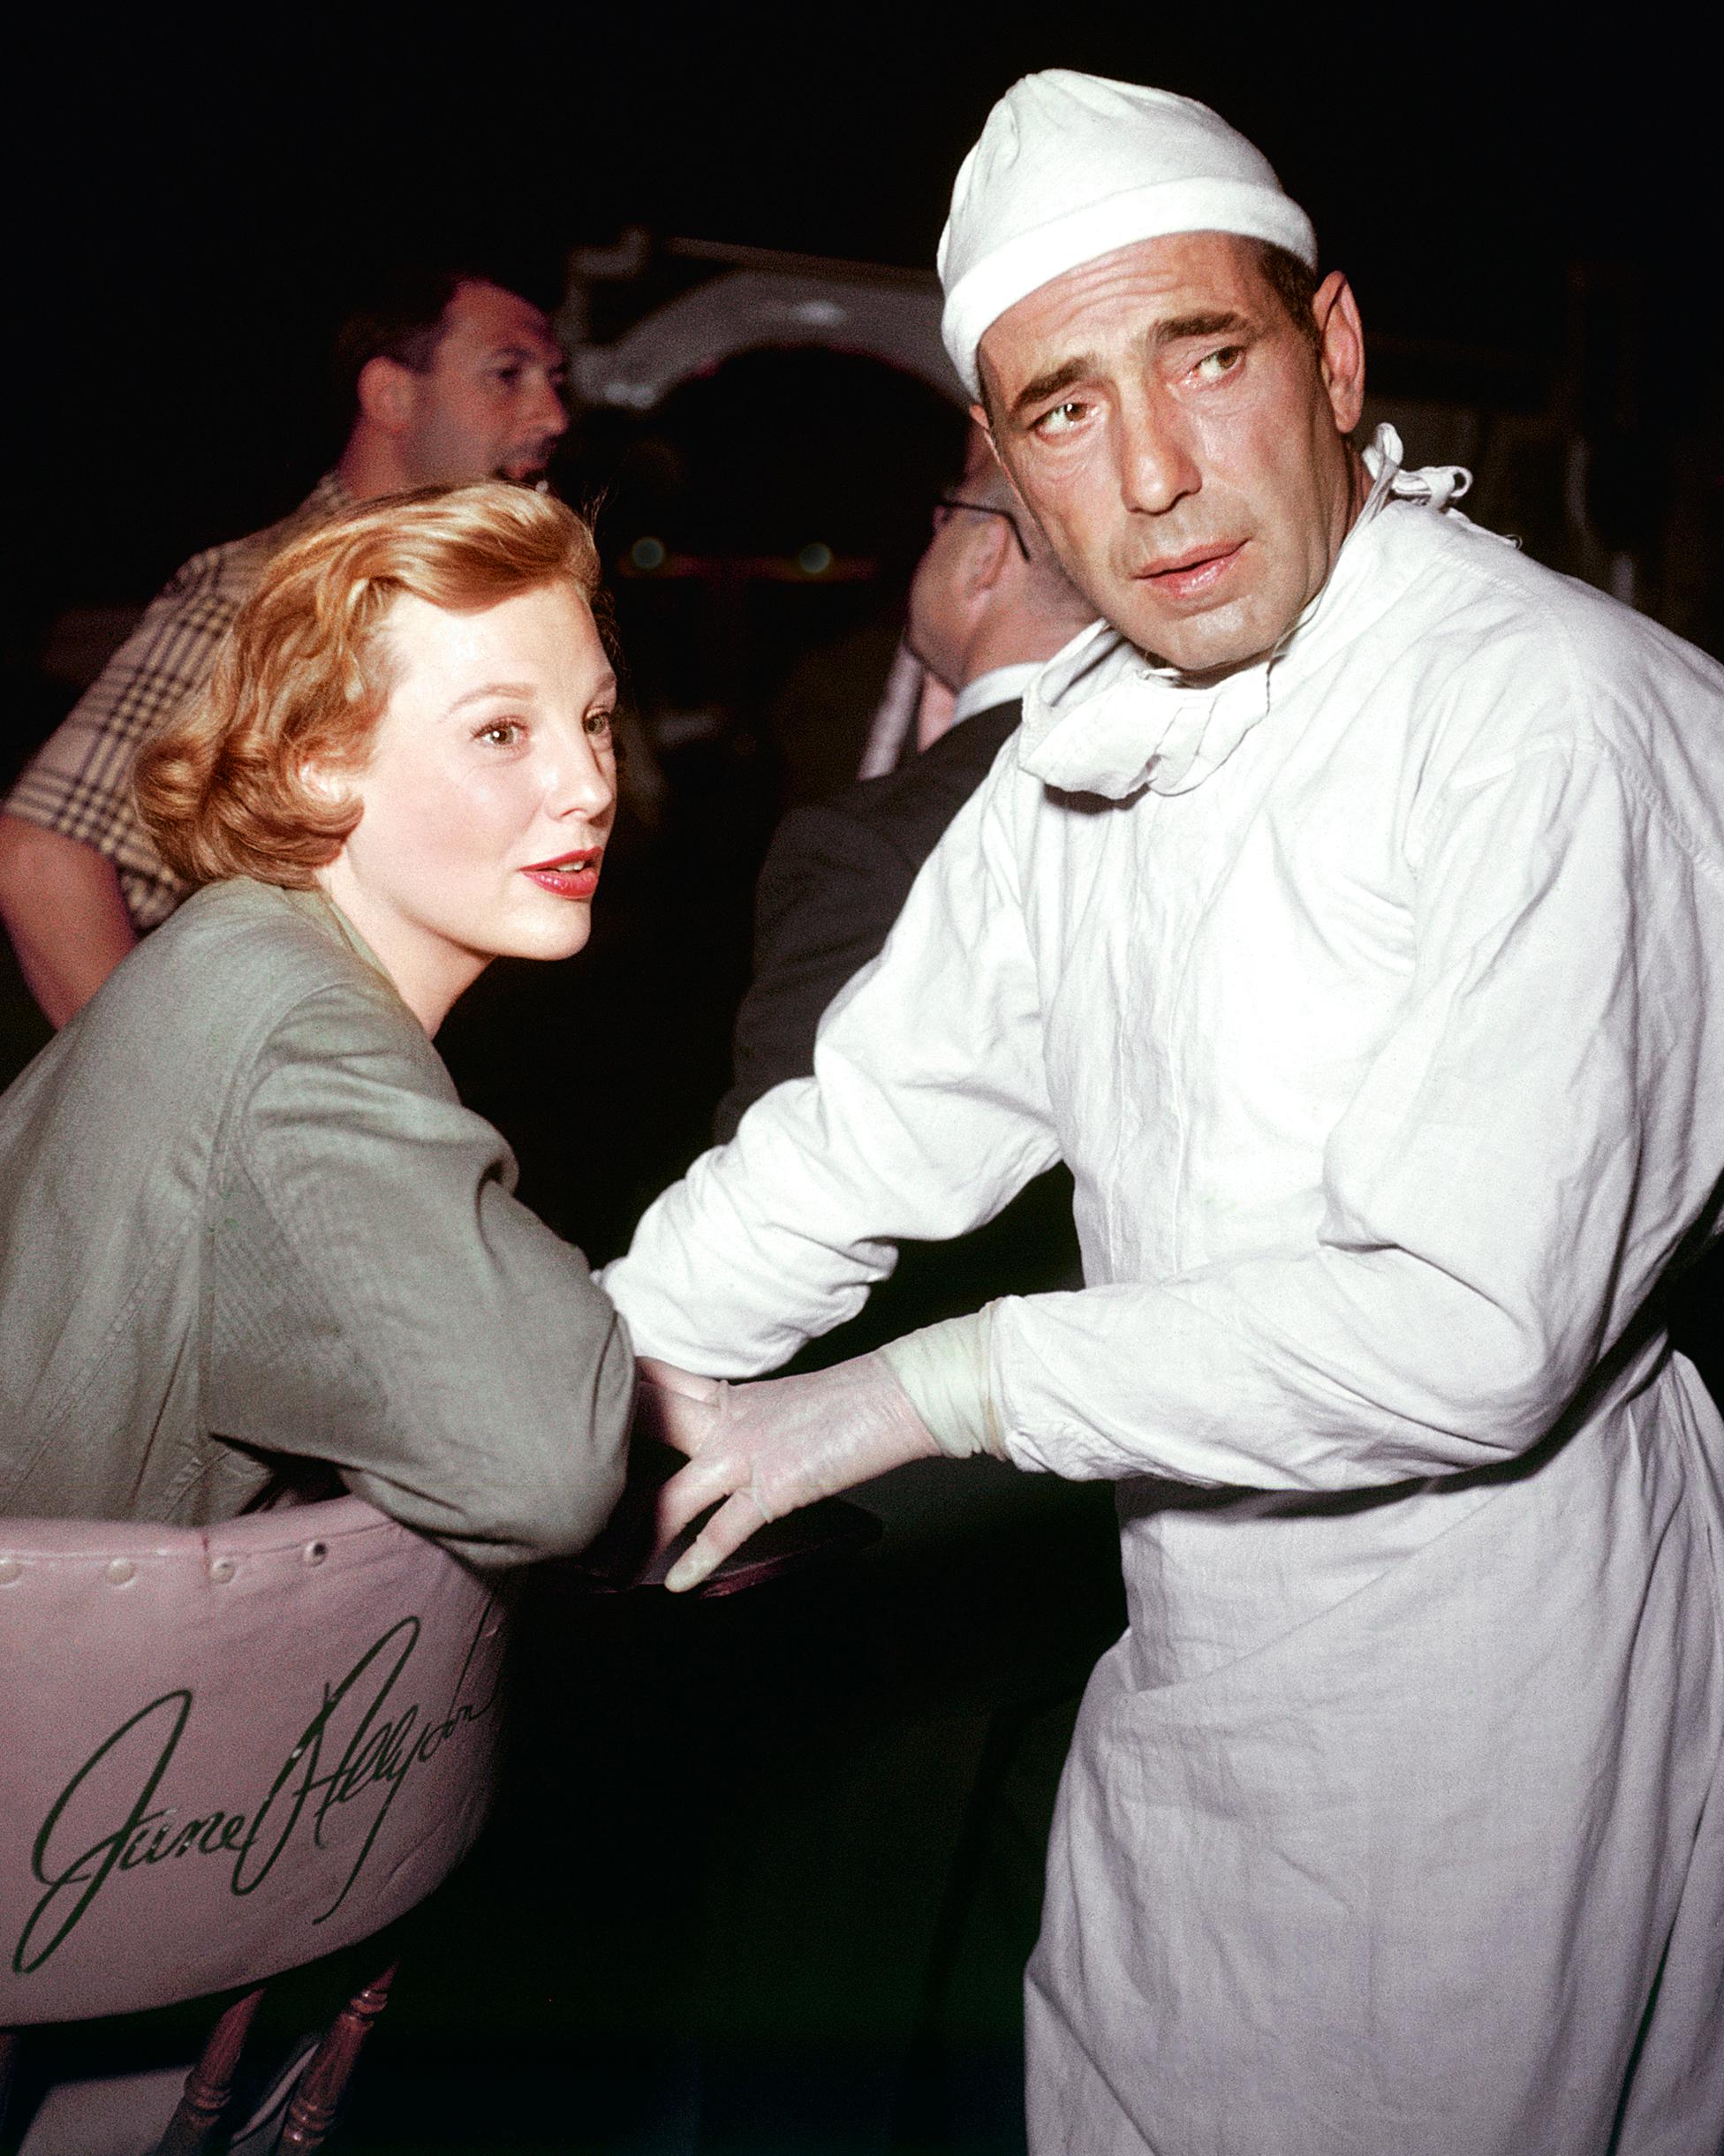 Frank Worth Black and White Photograph - Humphrey Bogart and June Allyson on Set